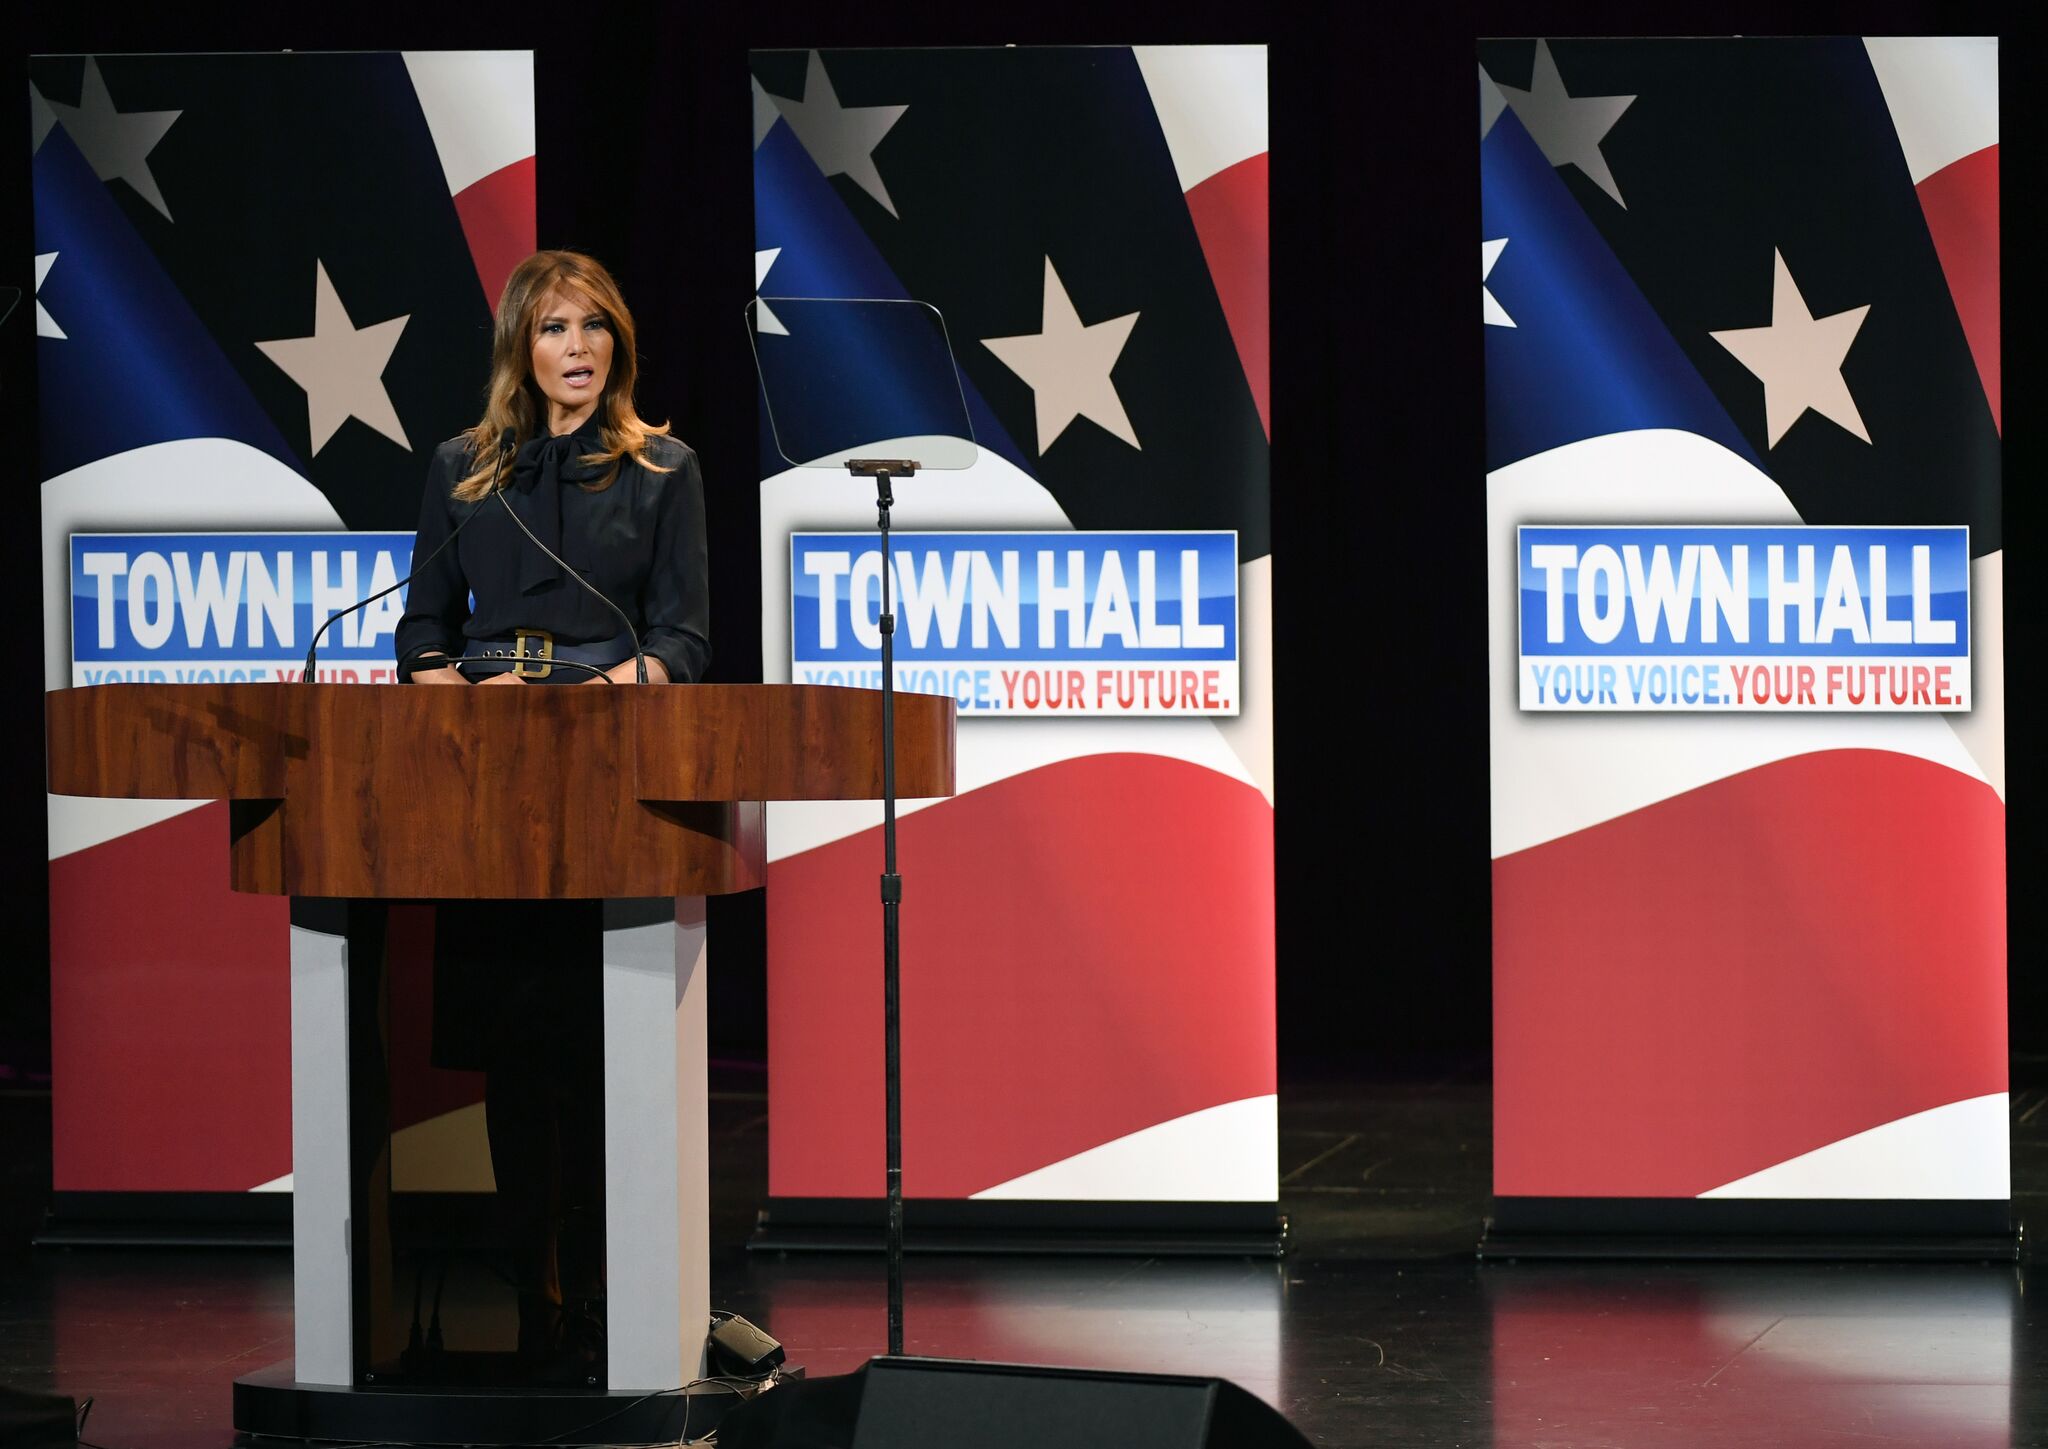  Melania Trump speaks at town hall meeting as part of her "Be Best" initiative | Getty Images / Global Images